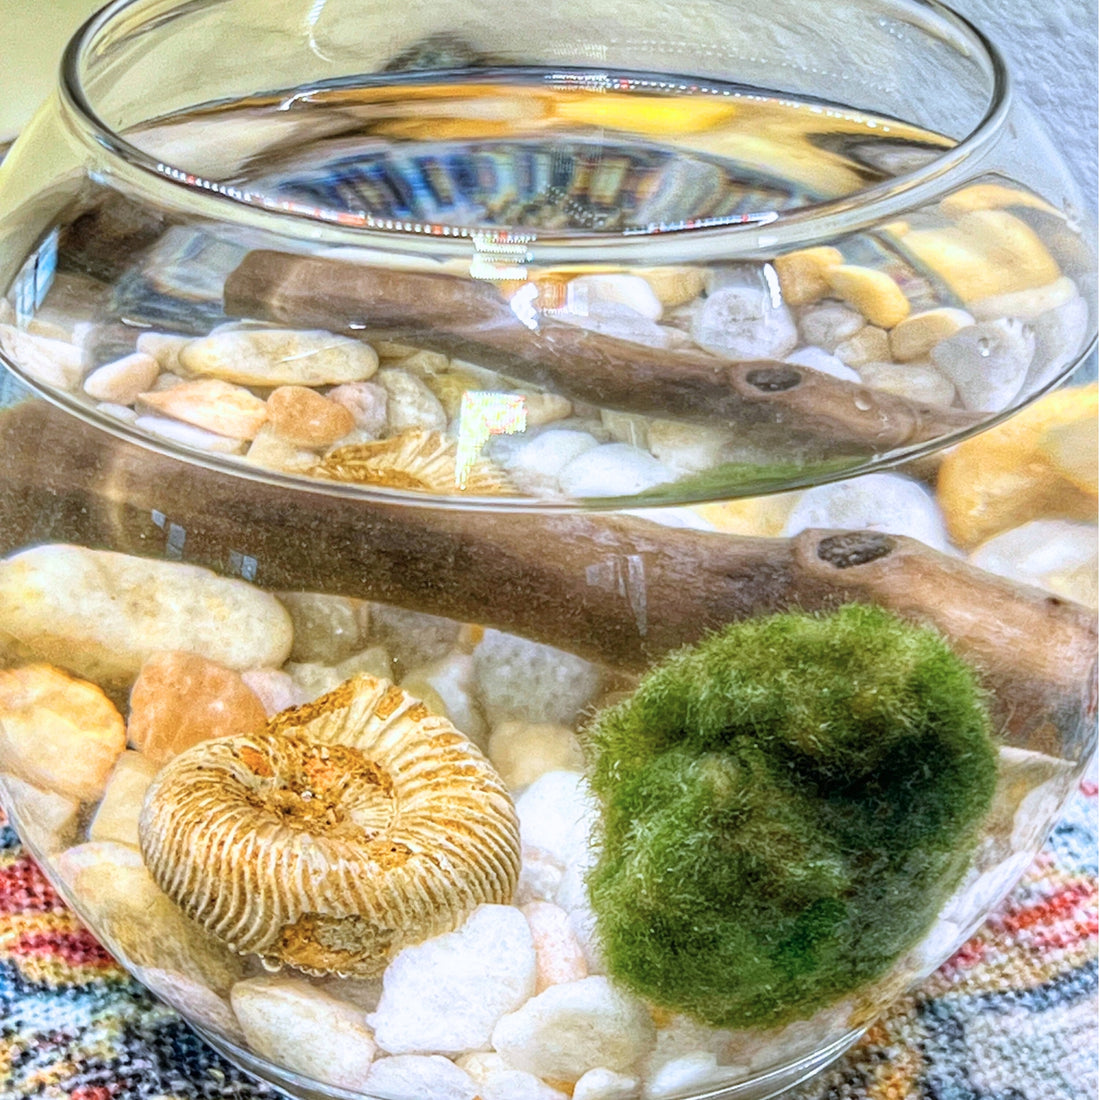 A close-up view of the inside of a glass Marimo Moss Ball aquarium, showcasing a vibrant green Marimo Moss Ball, a piece of driftwood, smooth pebbles, and a spiral shell fossil.